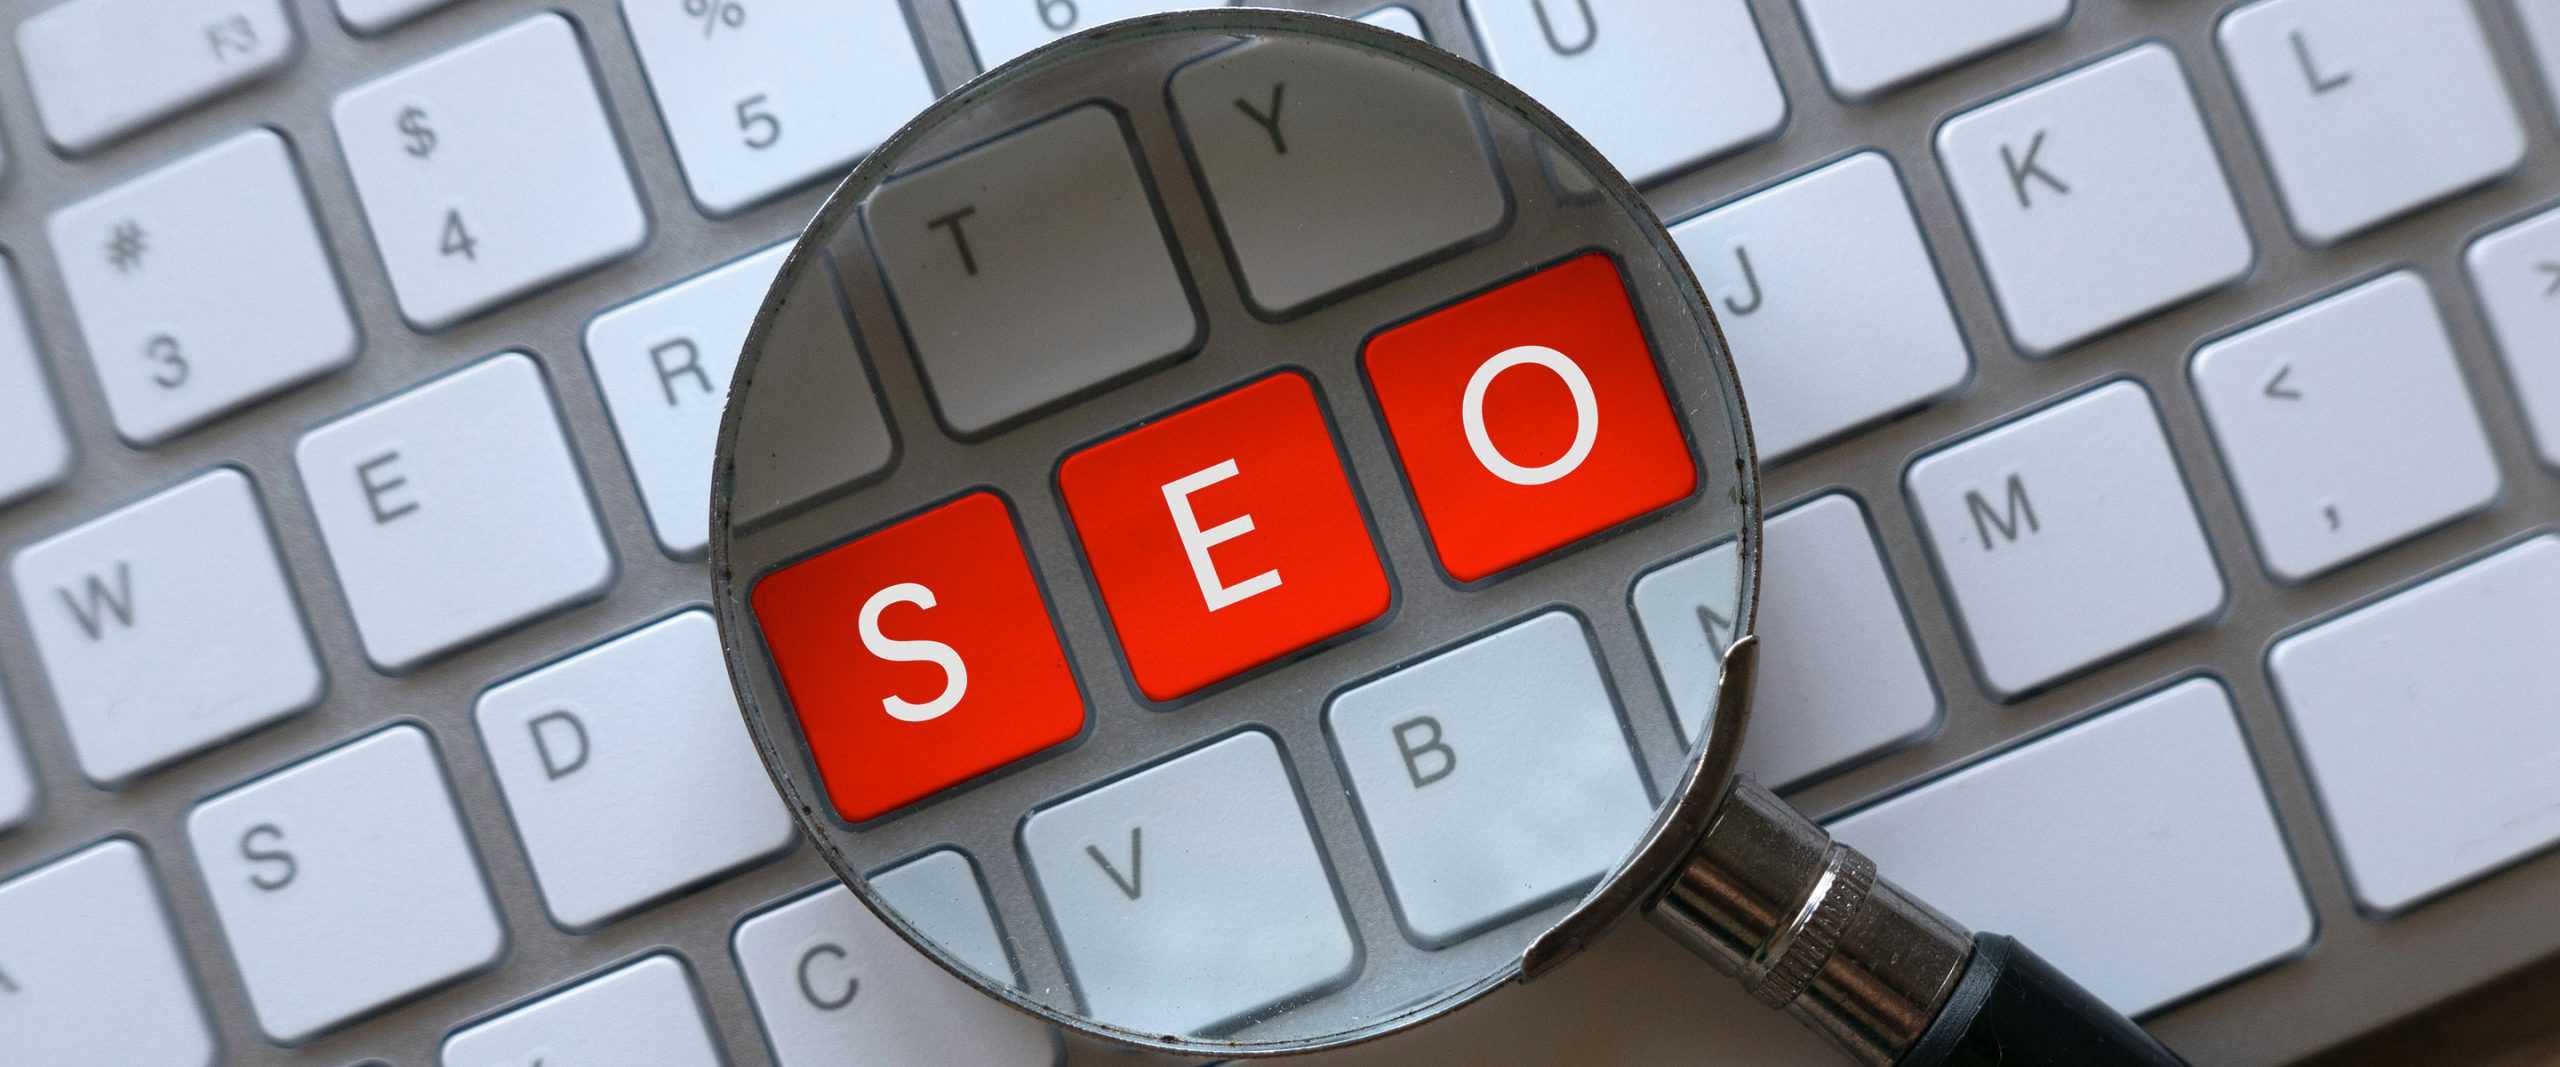 SEO&#8217;s Not Going Anywhere, Says Google